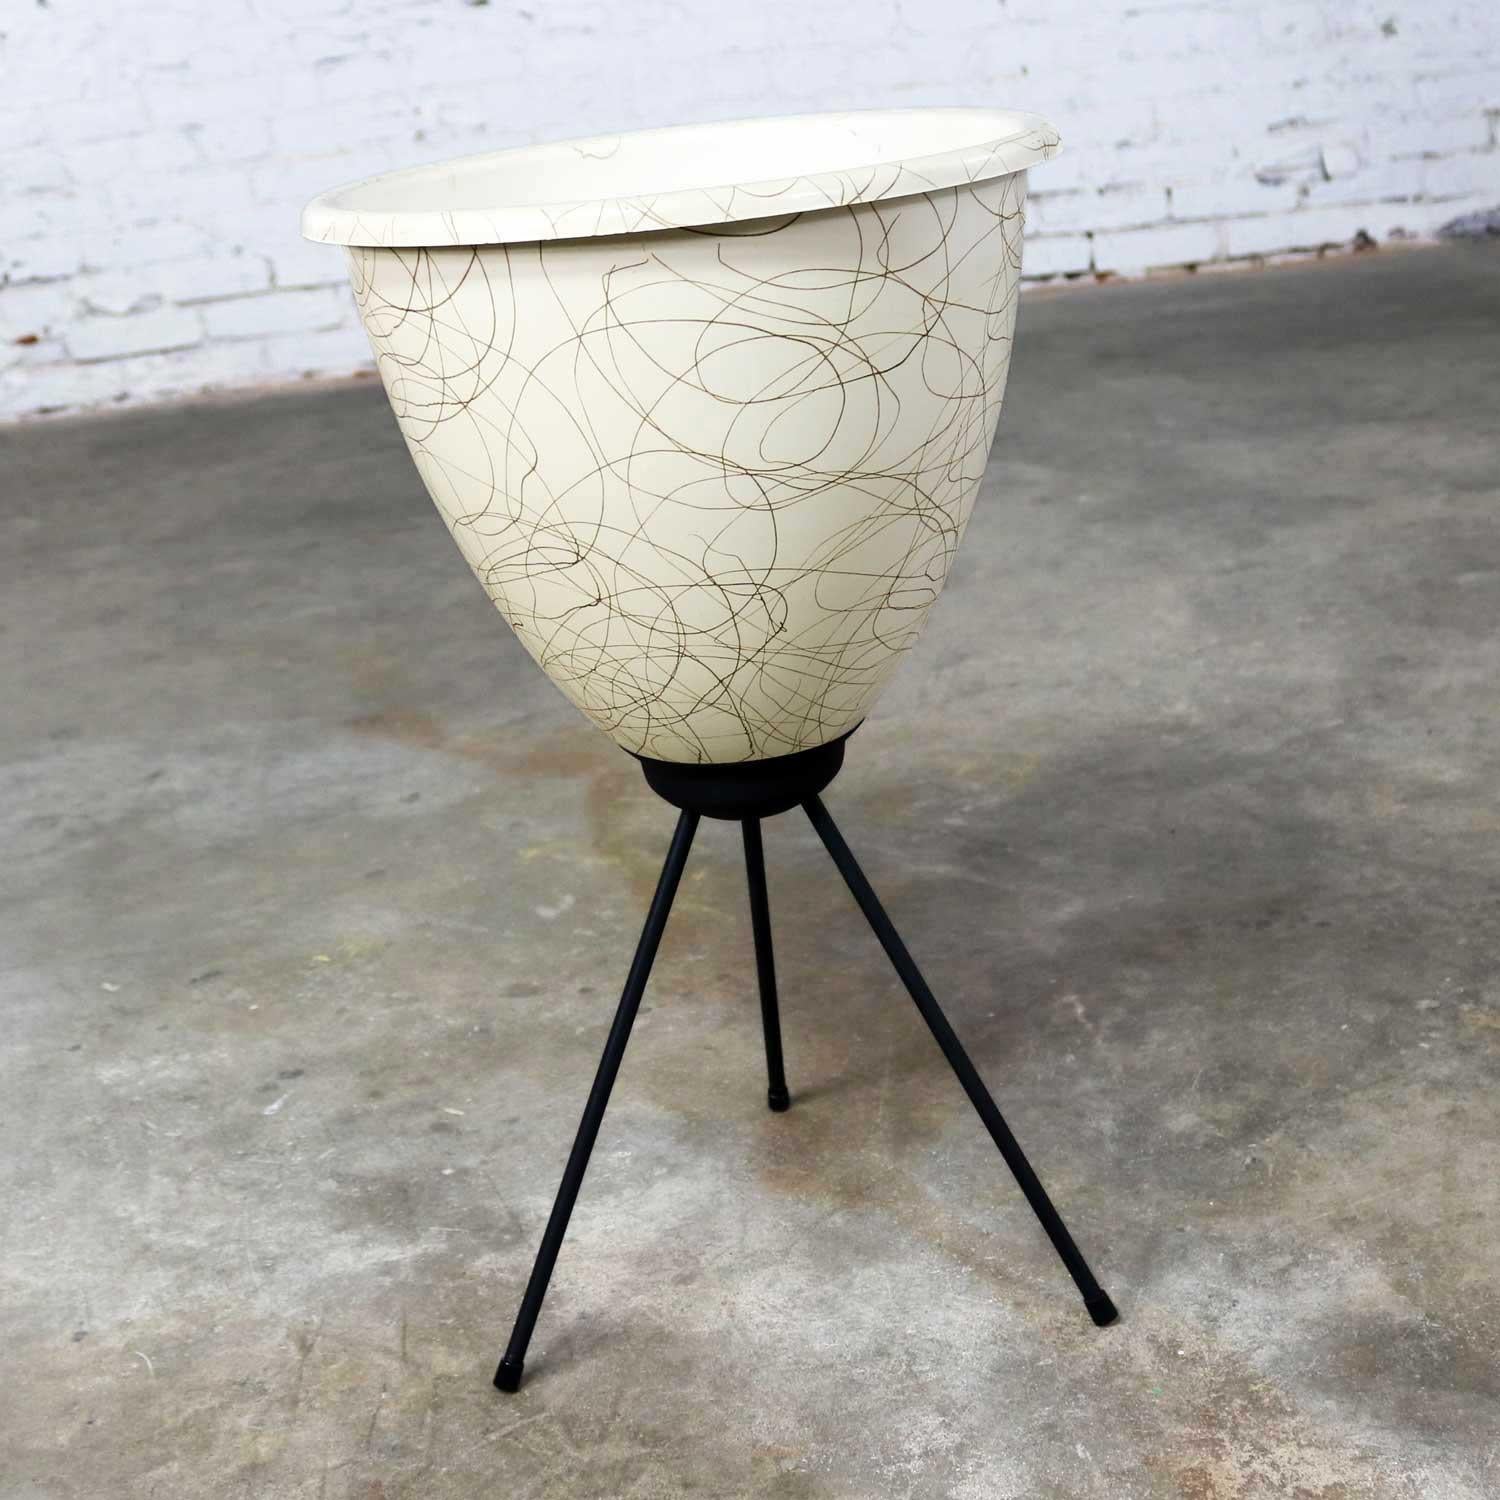 Handsome Mid-Century Modern bullet planter in eggshell white and gold swirled fiberglass with a lip around the edge and an attached black iron set of tripod legs. This planter is in wonderful vintage condition overall. There are tiny cracks in the